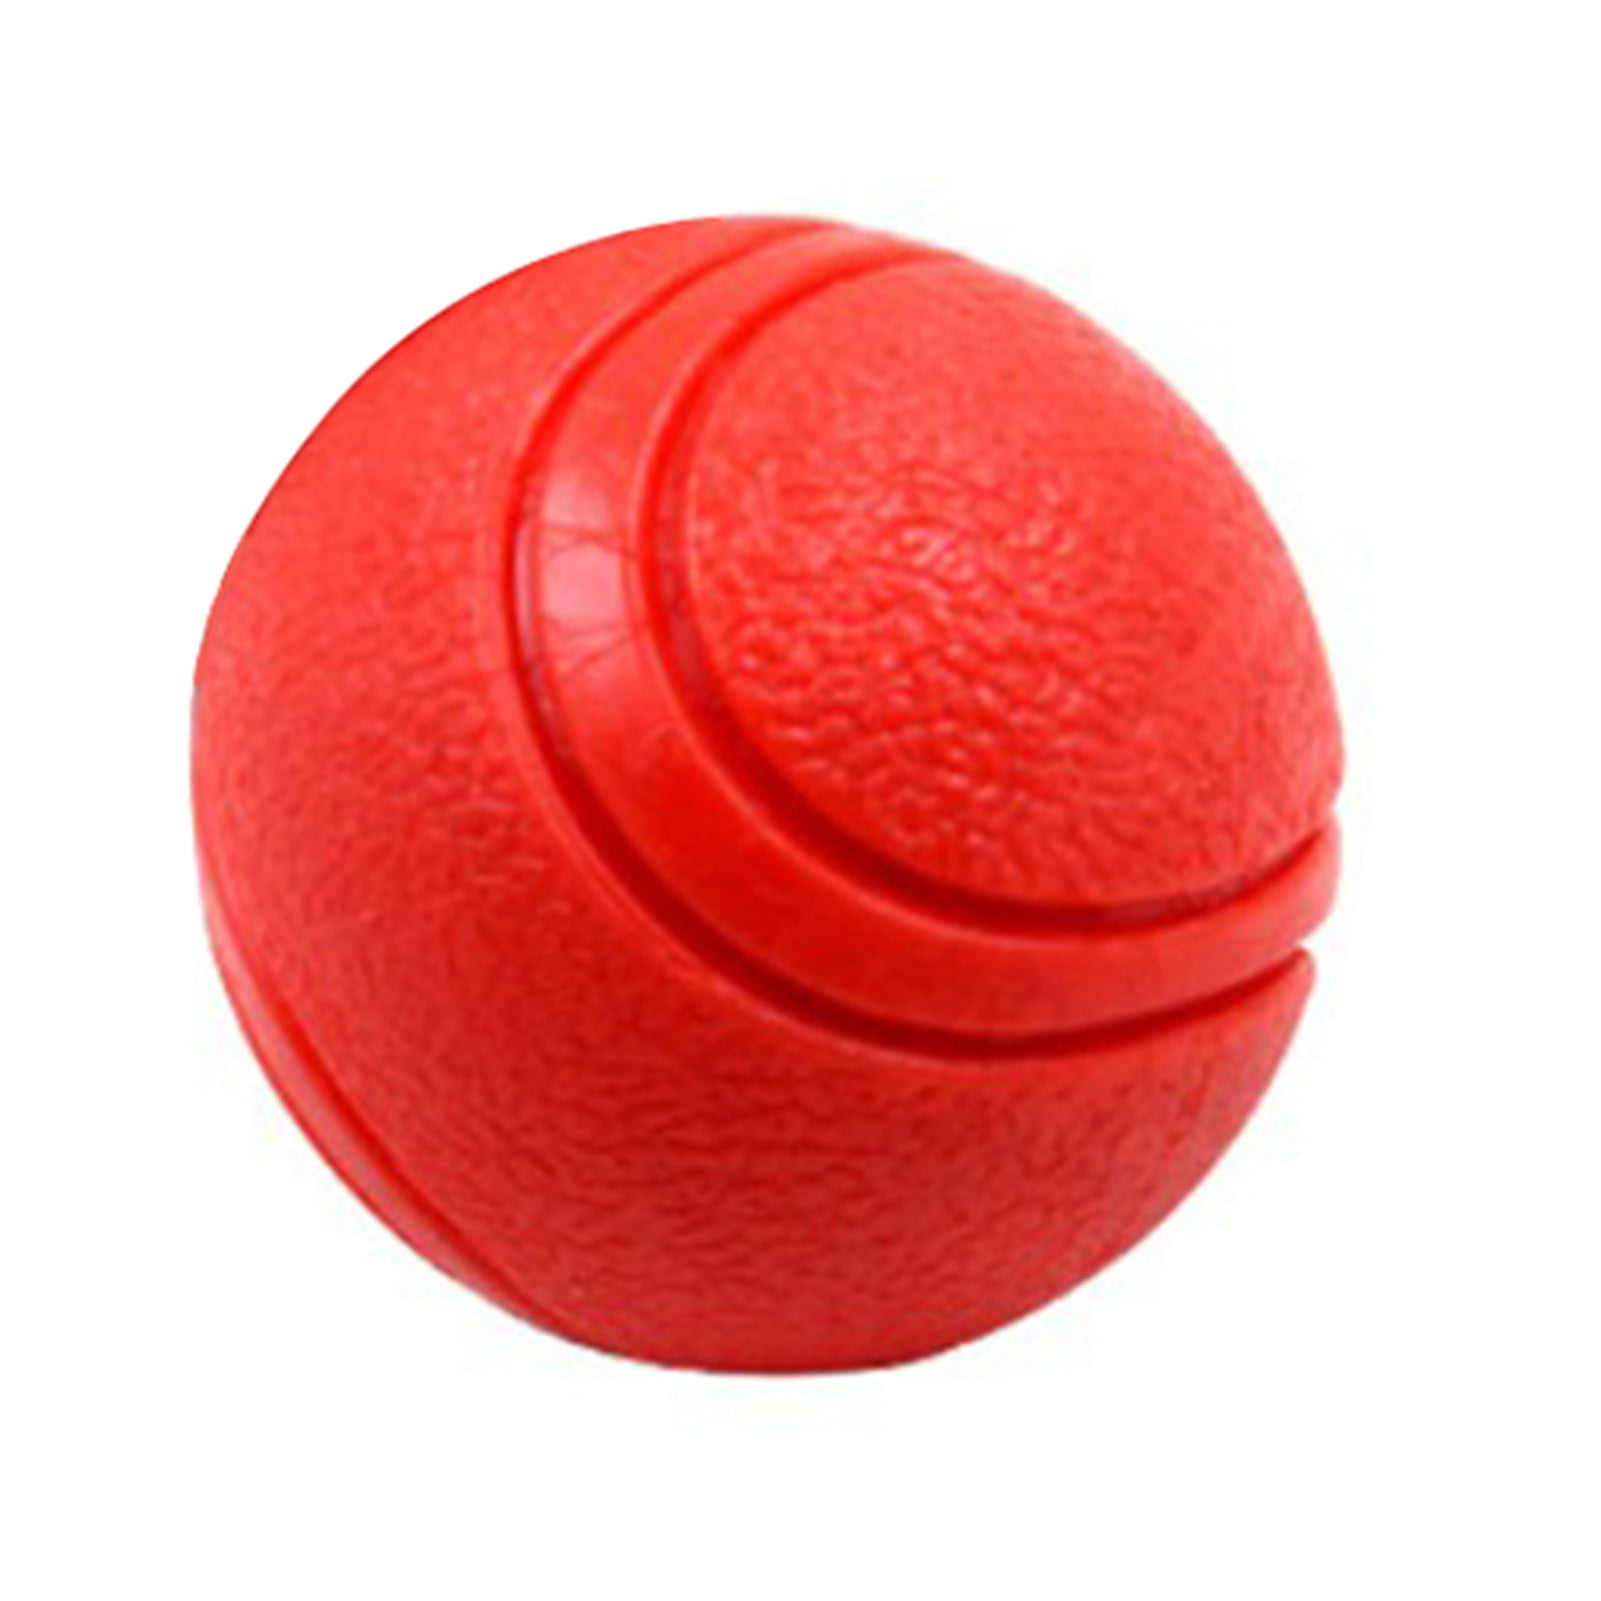 2 Rubber Ball 2.5” Solid Hard Wearing Rubber Exerciser RED Fetch Retrieve Tough 